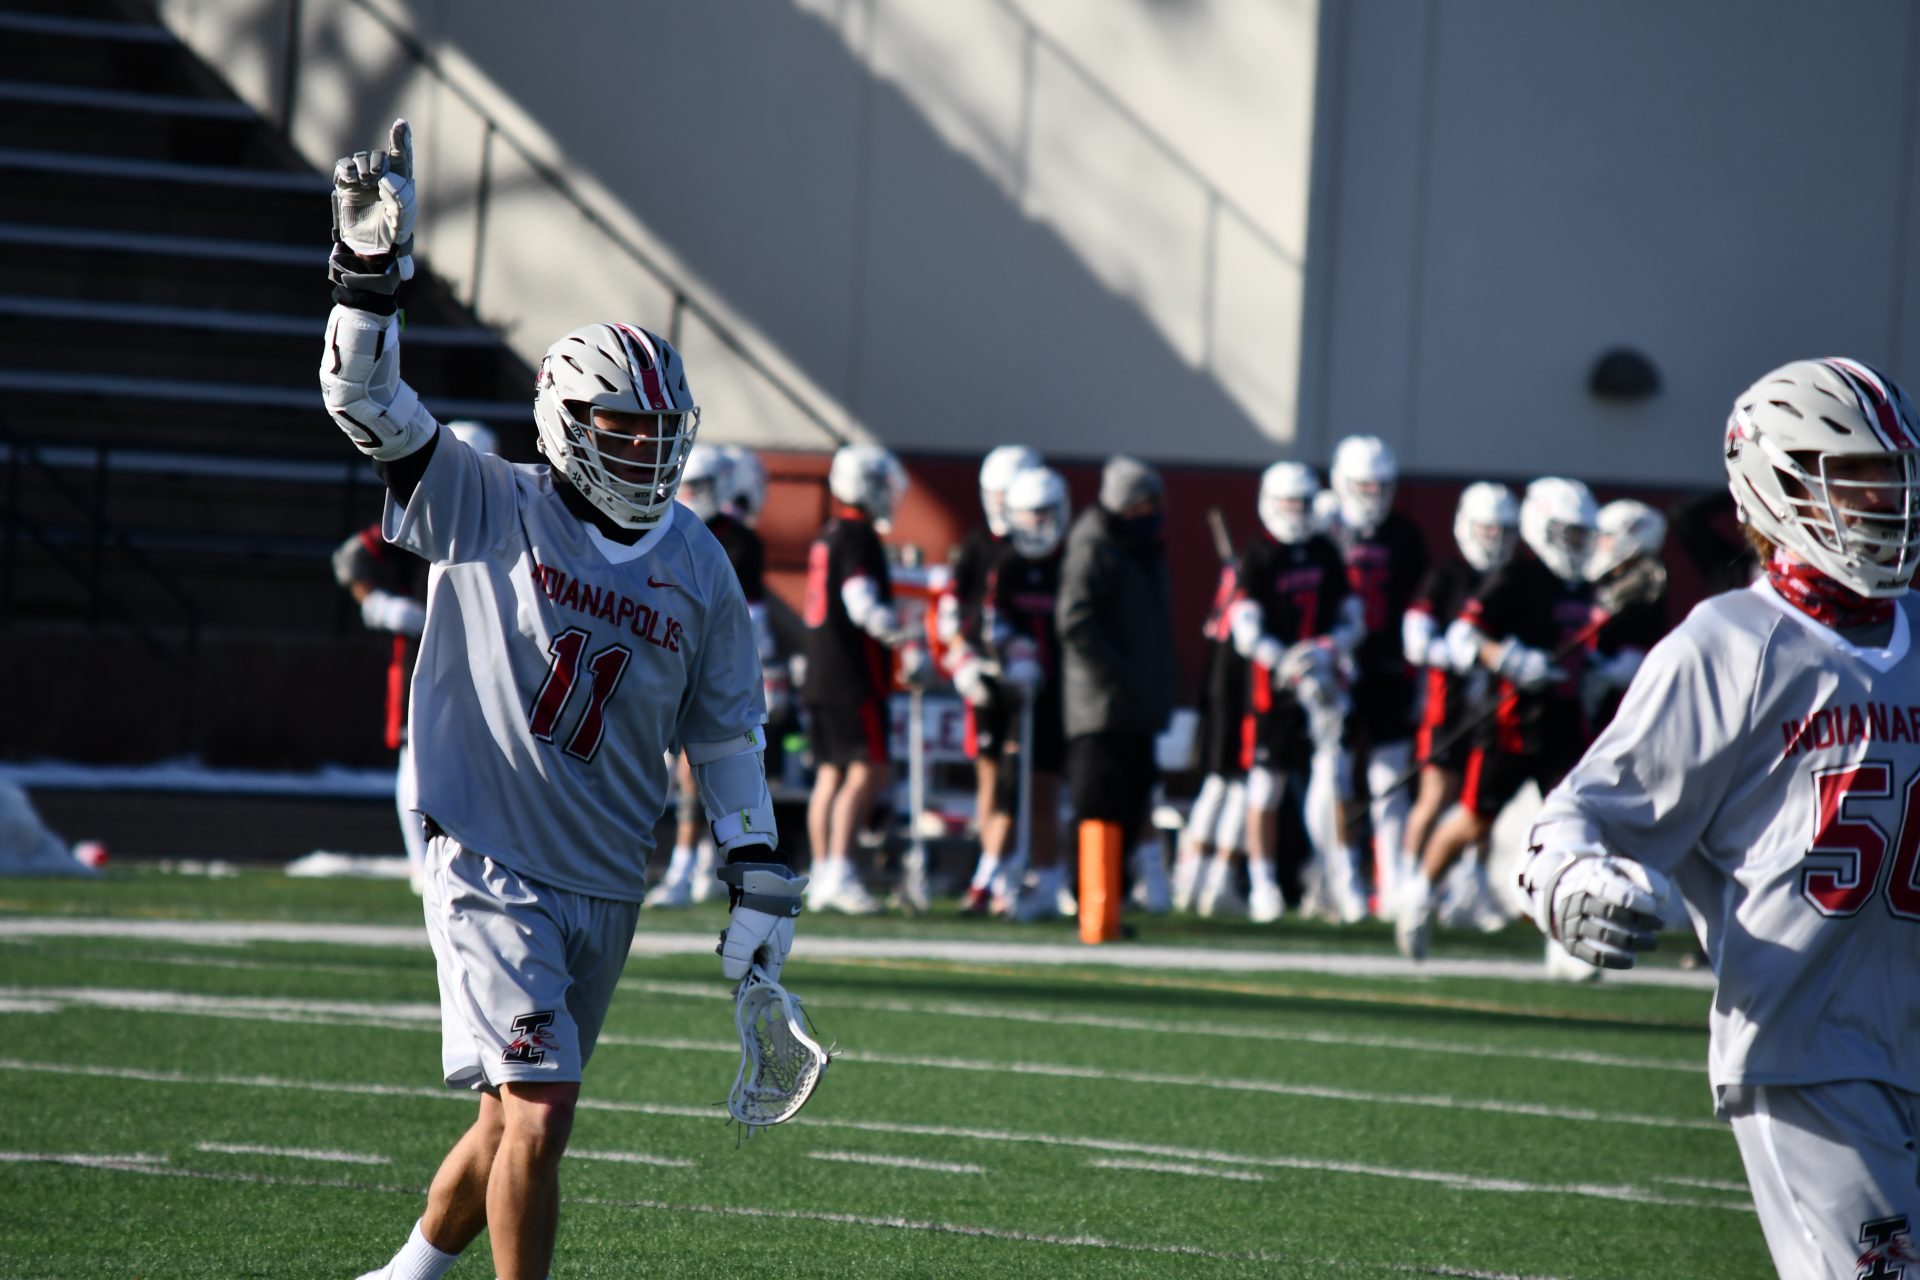 No. 9 ranked UIndy Men’s Lacrosse secures season-opening win over Lewis